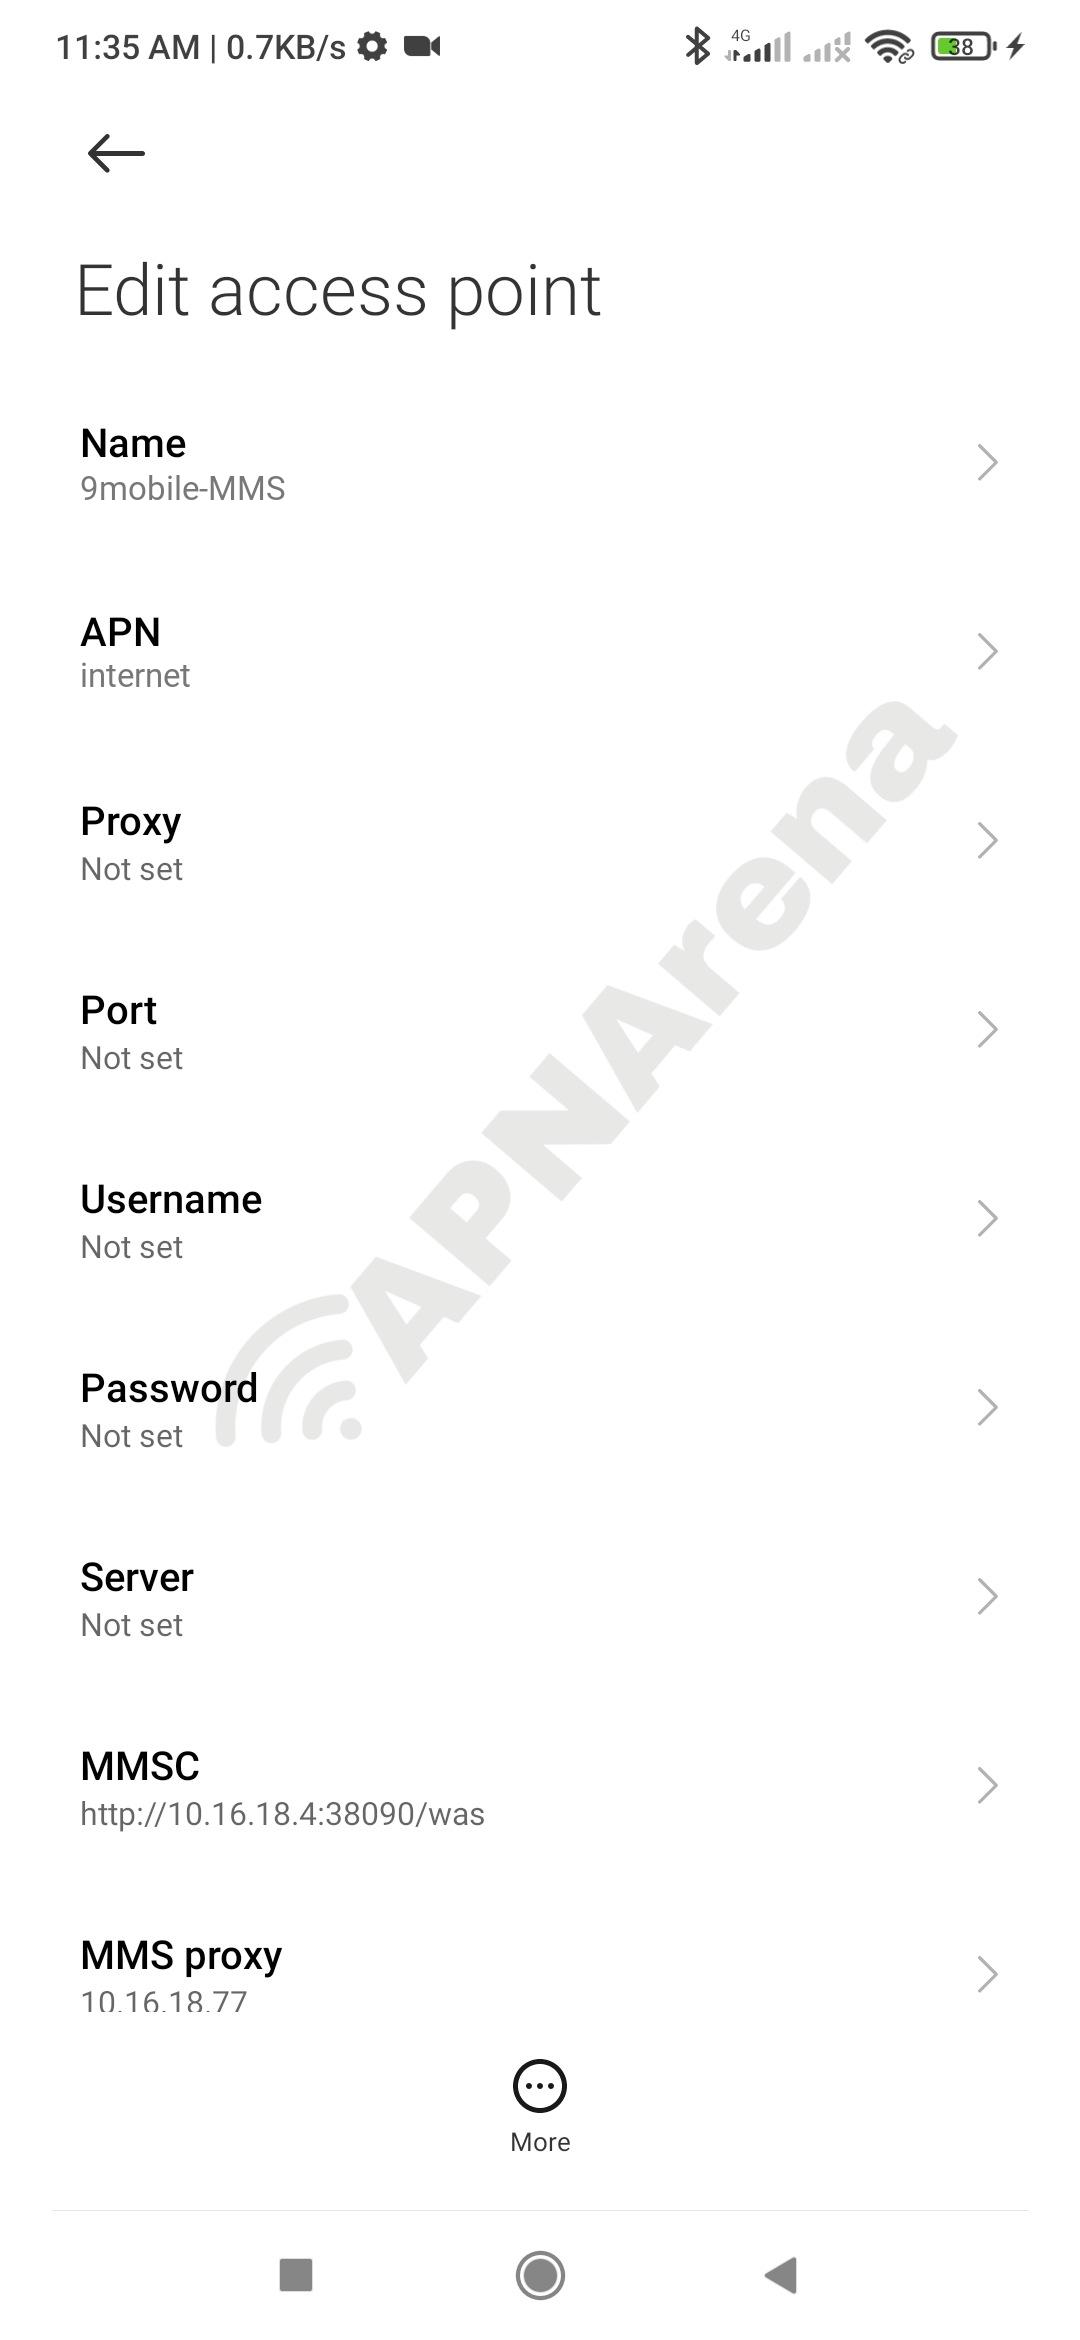 9mobile (Etisalat) MMS Settings for Android